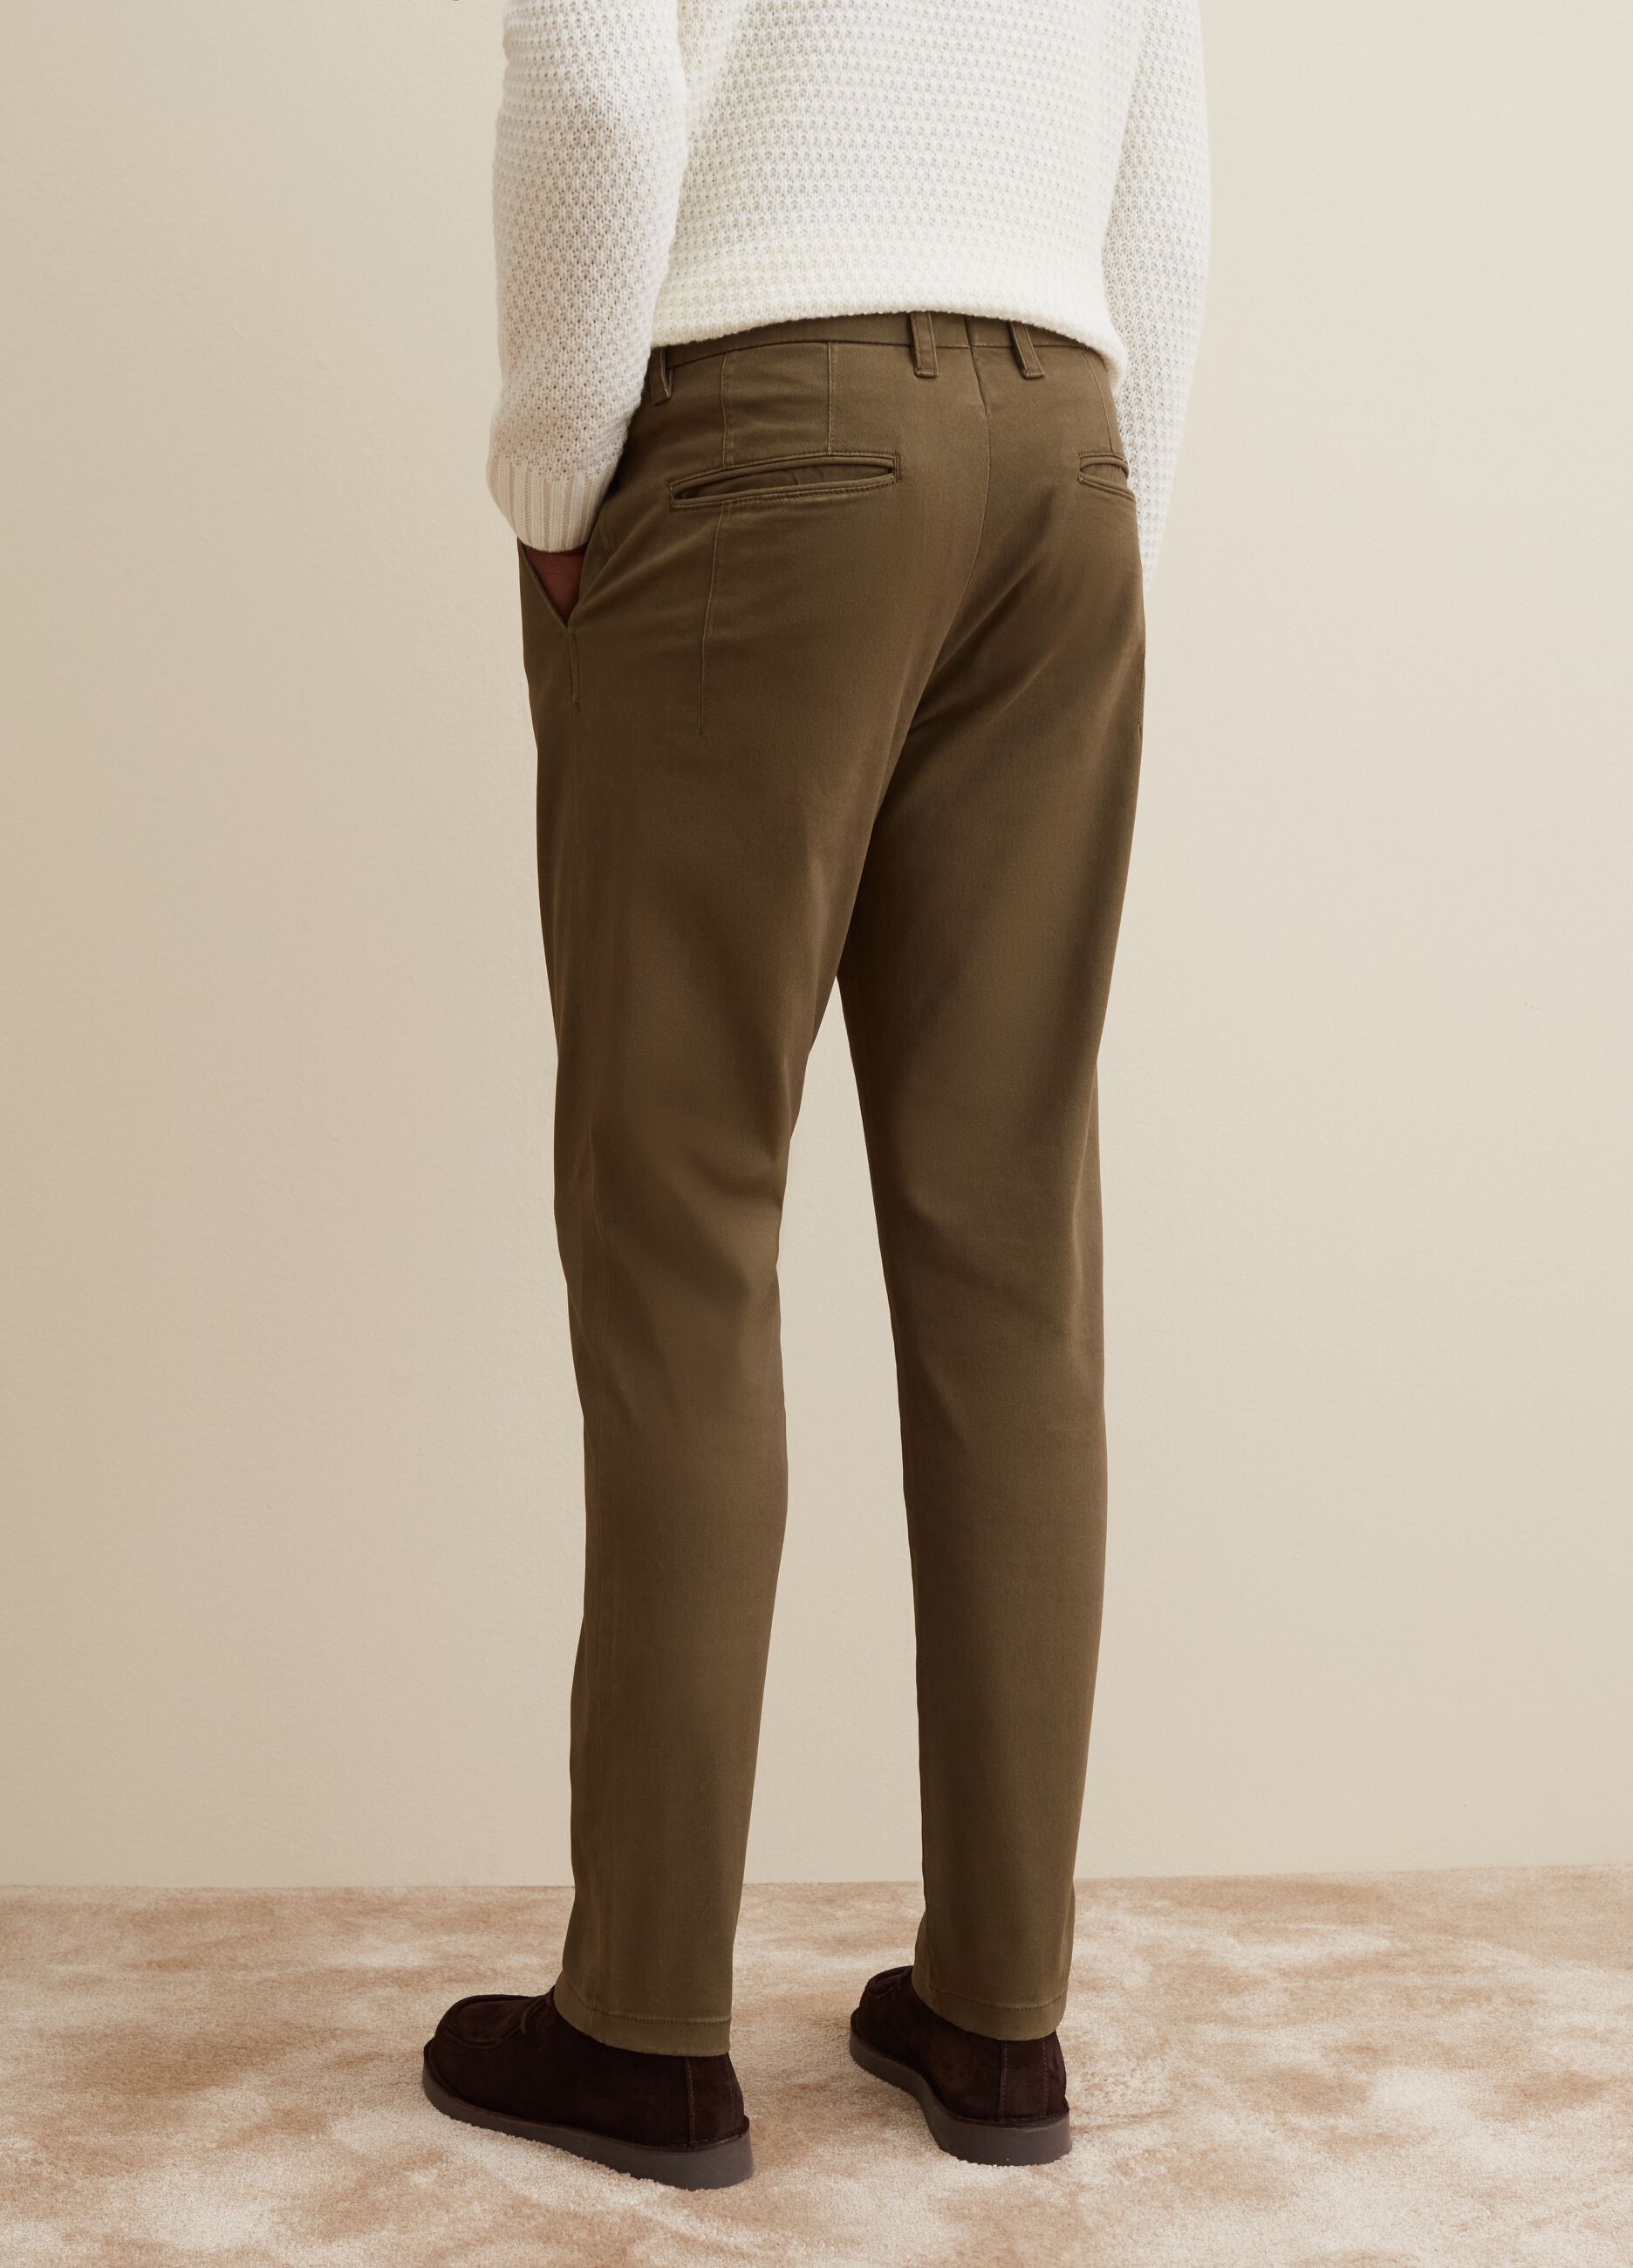 Man's Olive Green Stretch cotton chinos